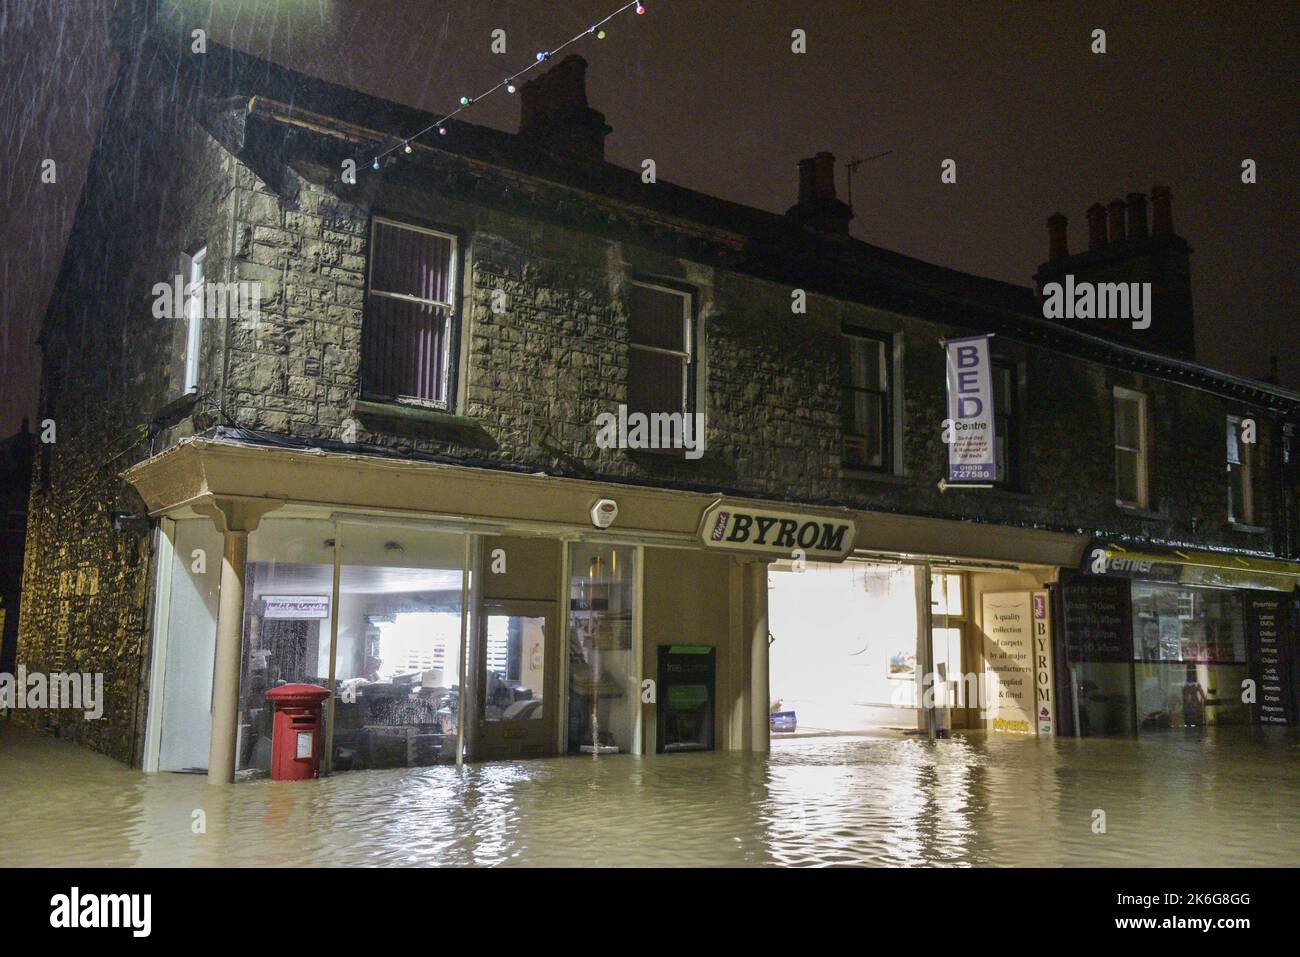 Kendal, Cumbria - December 6th 2015 - A row of shops and a post box flooded in Kendal, Cumbria in the early hours of the 6th of December 2015 after 36 hours of torrential rain during Storm Desmond. Pic Credit: Scott CM/Alamy Live News Stock Photo